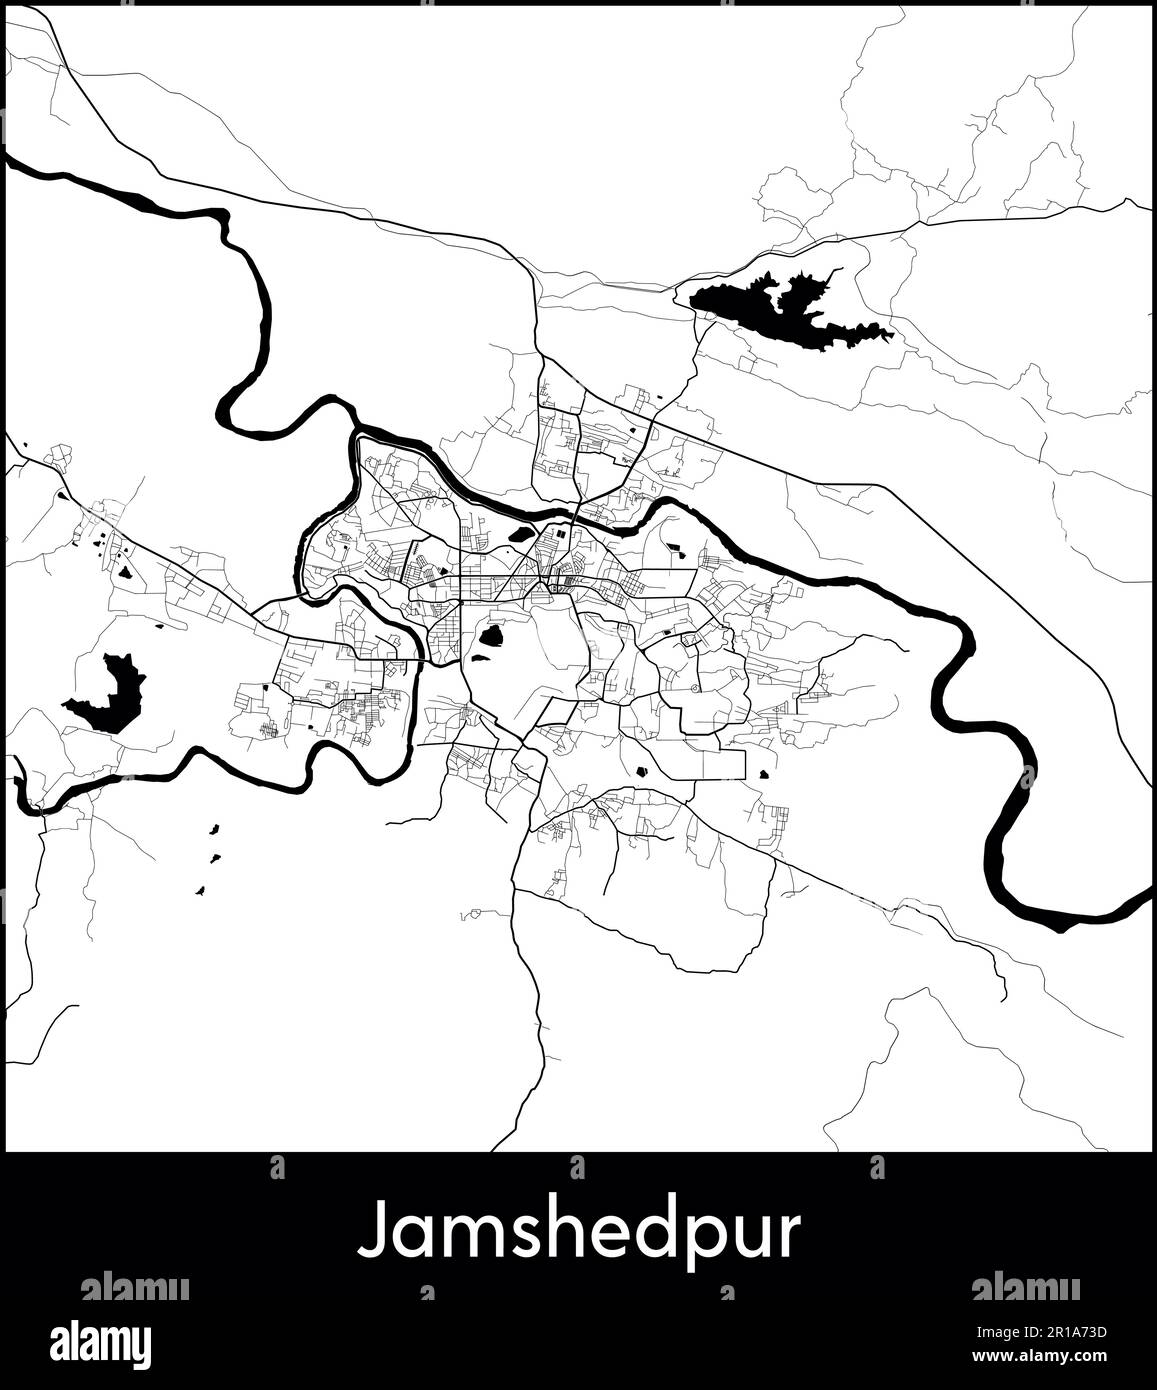 City Map Asia India Jamshedpur vector illustration Stock Vector